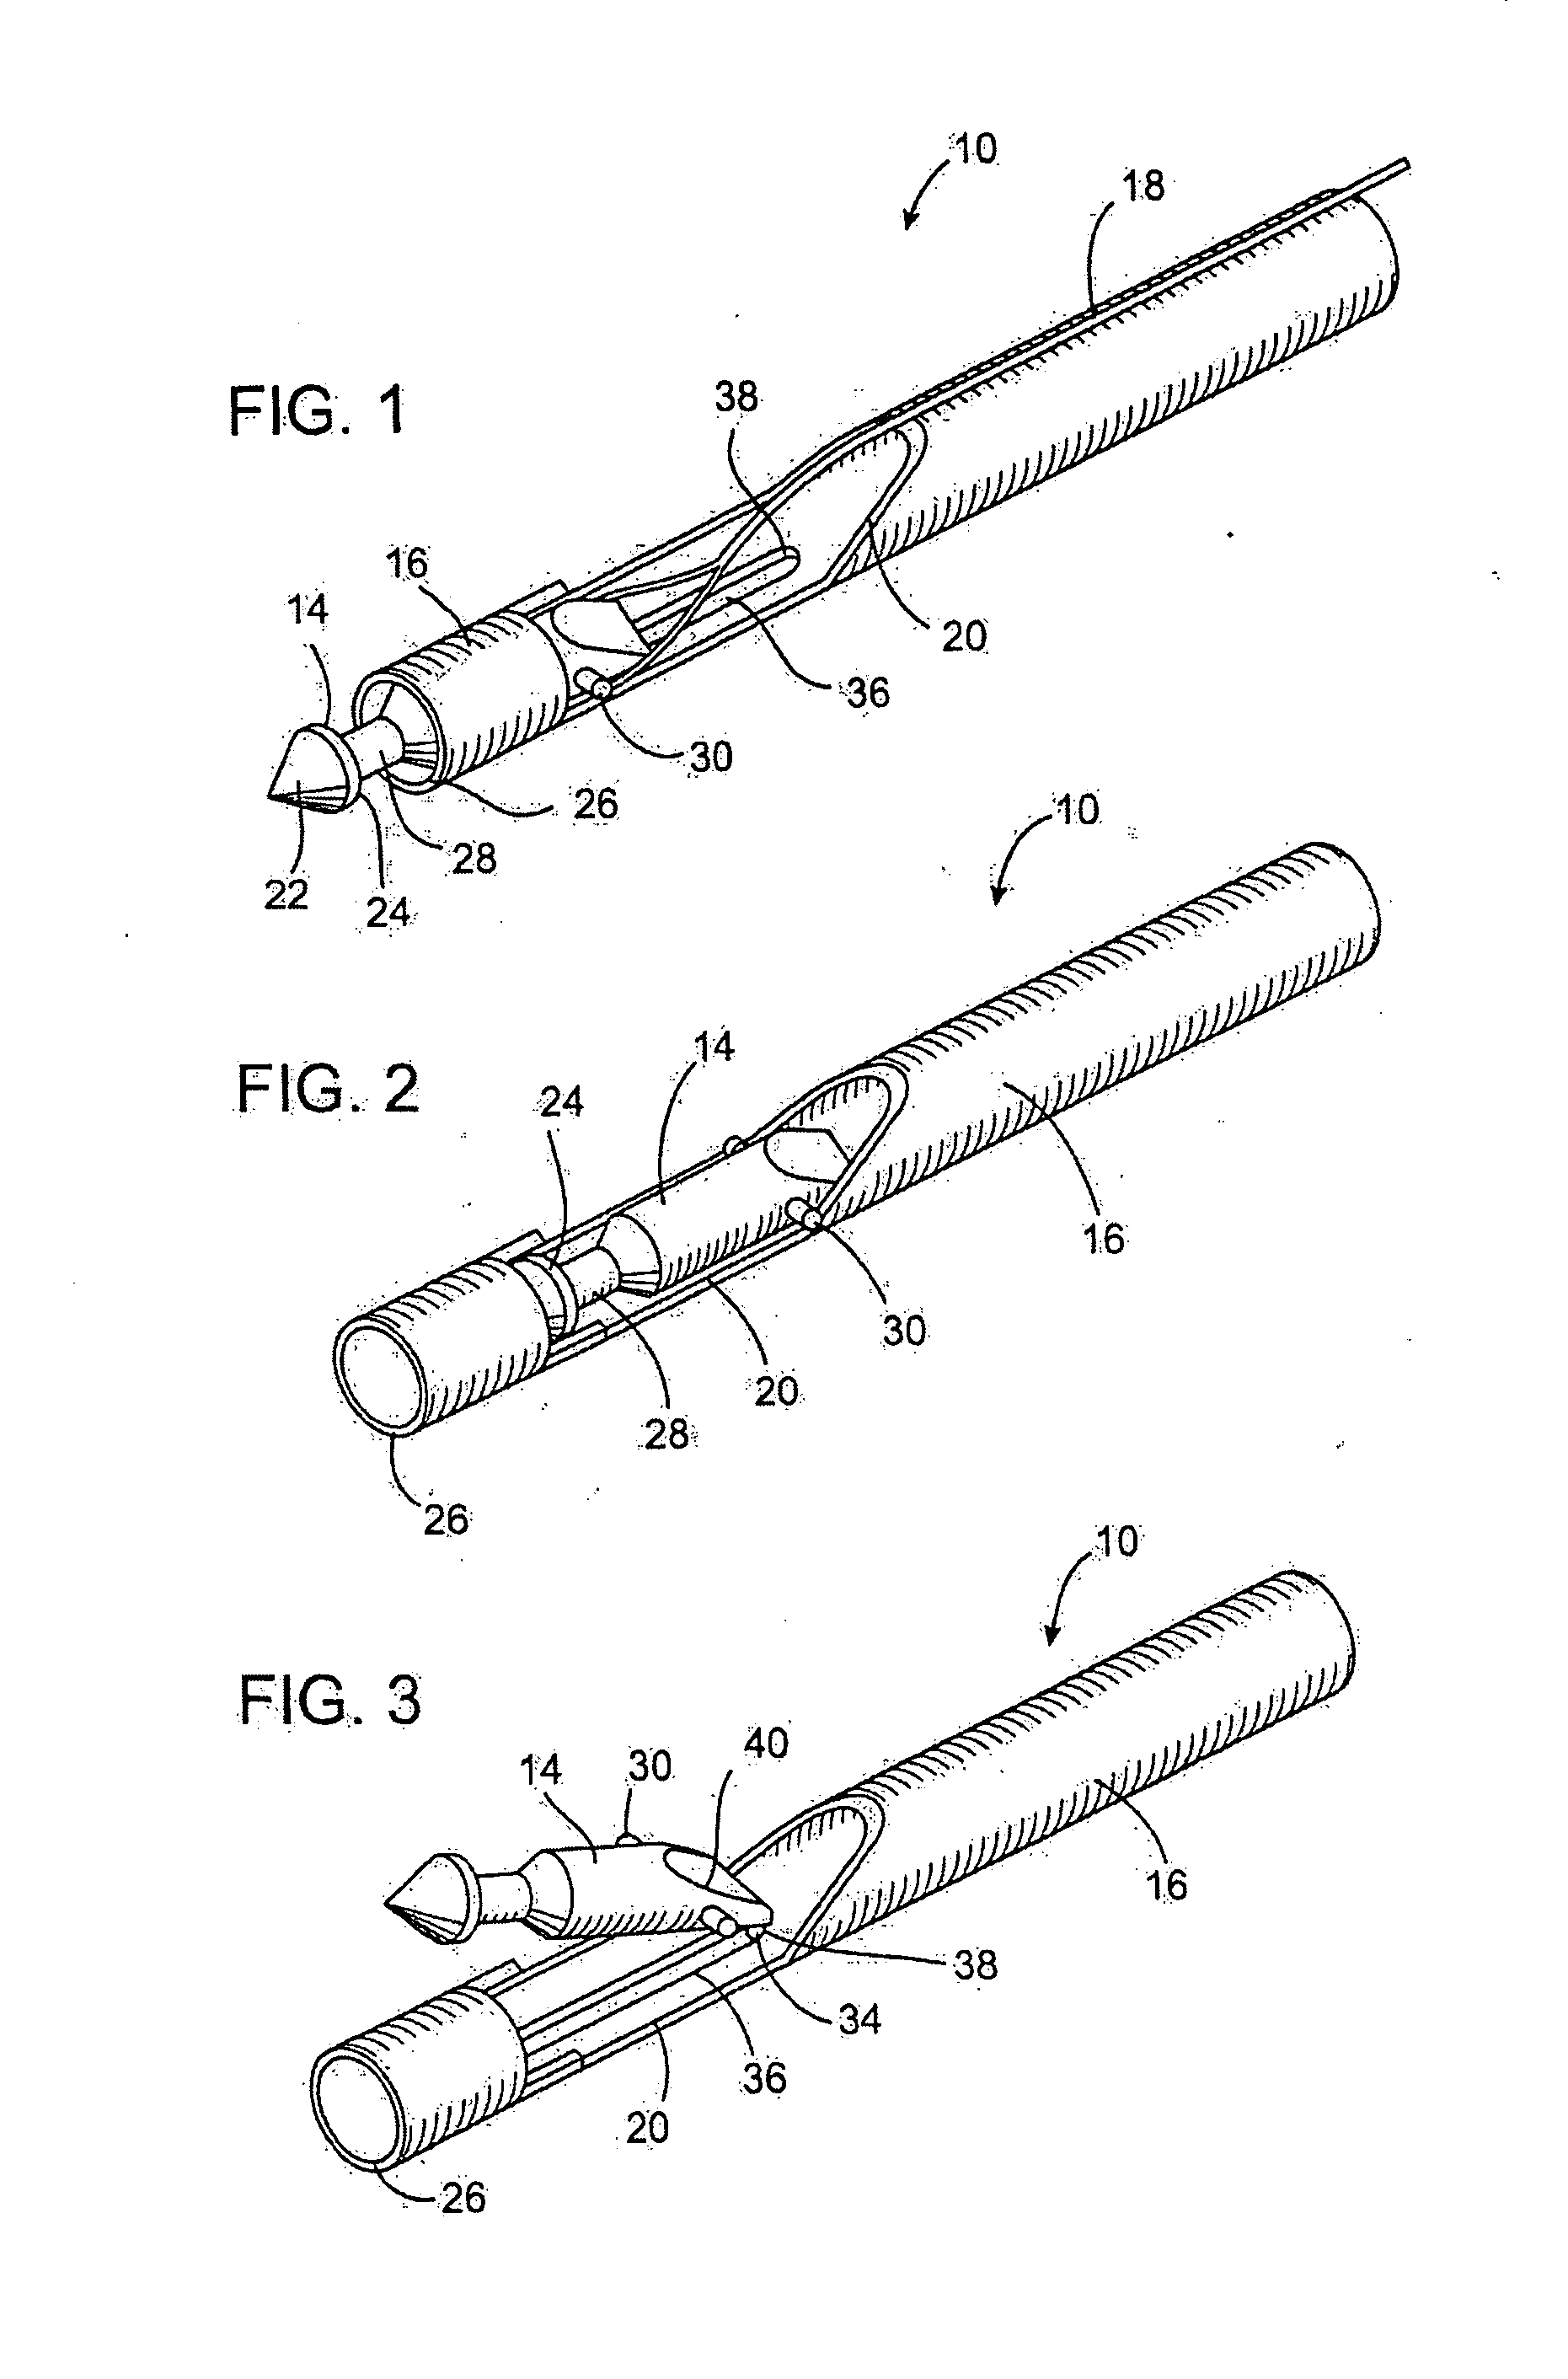 Surgical method for treating a vessel wall